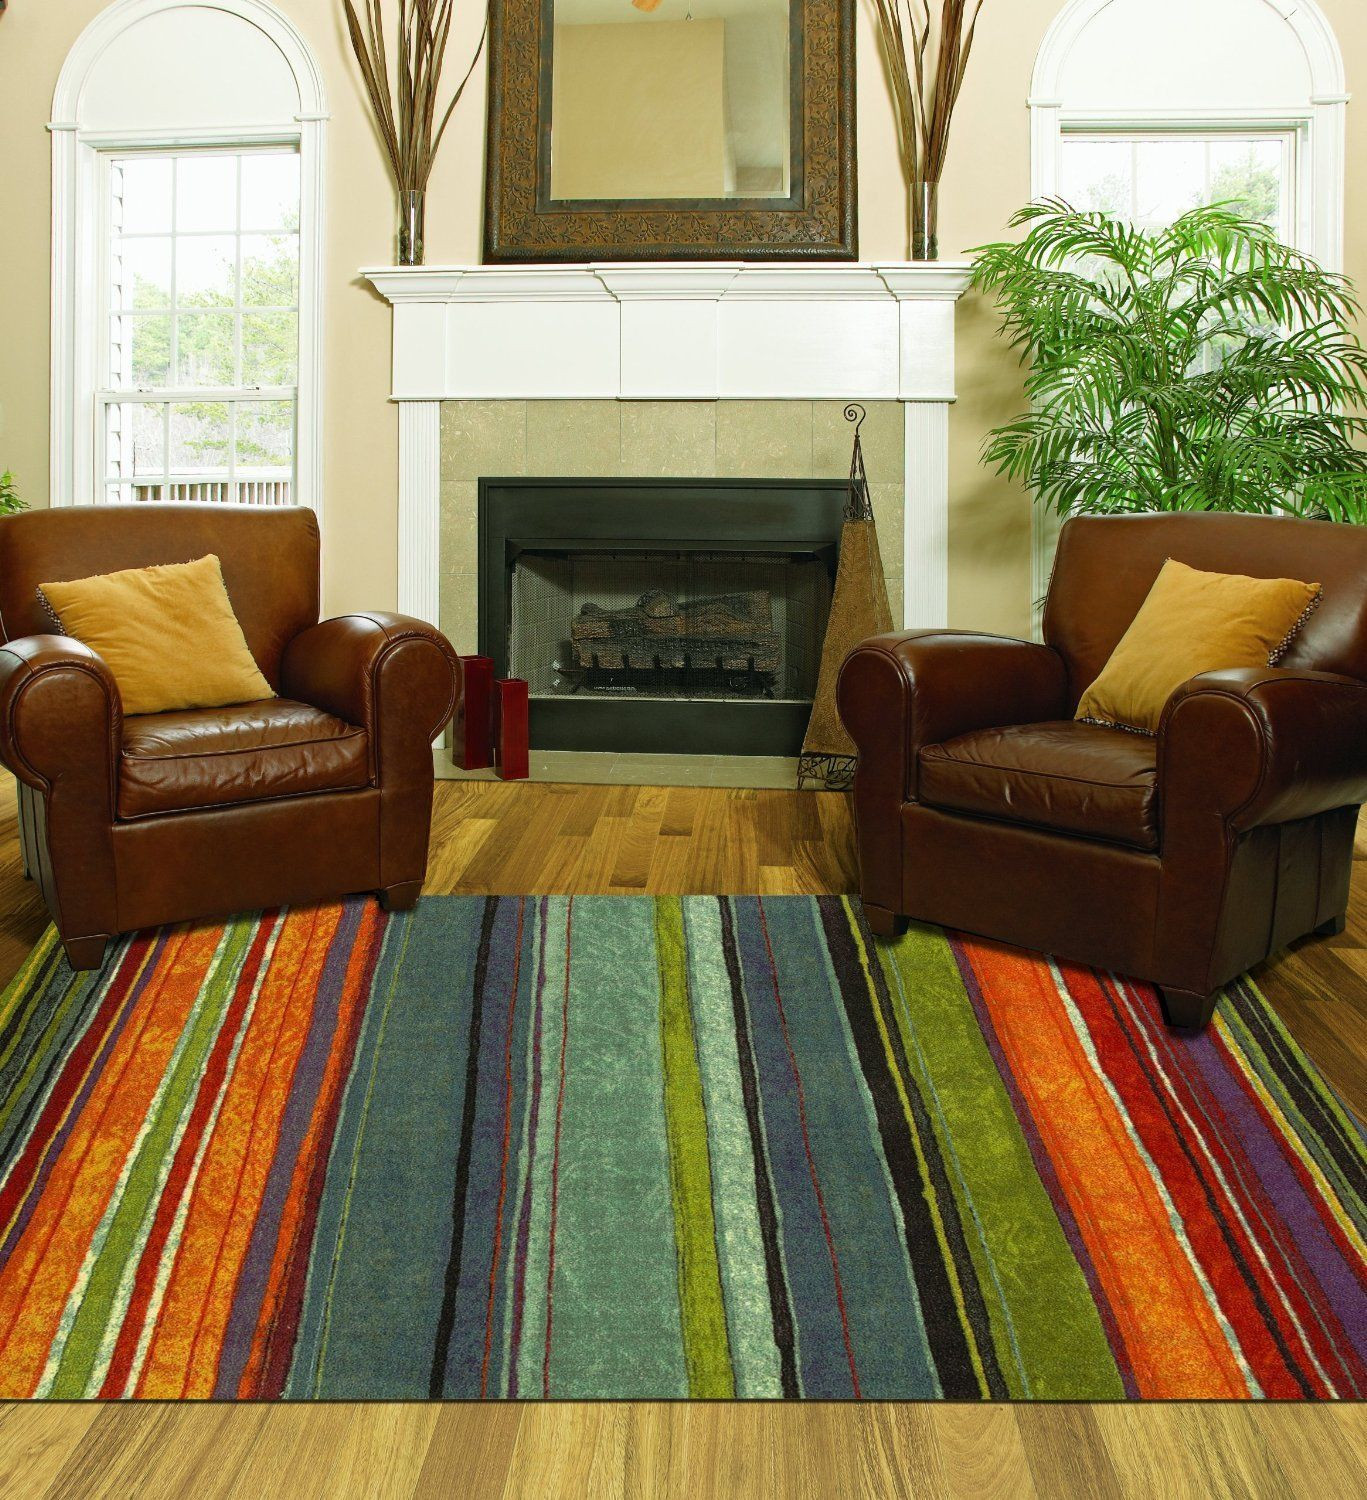 Decorative Rugs For Living Room
 Area Rug Colorful 8x10 Living Room Size Carpet Home